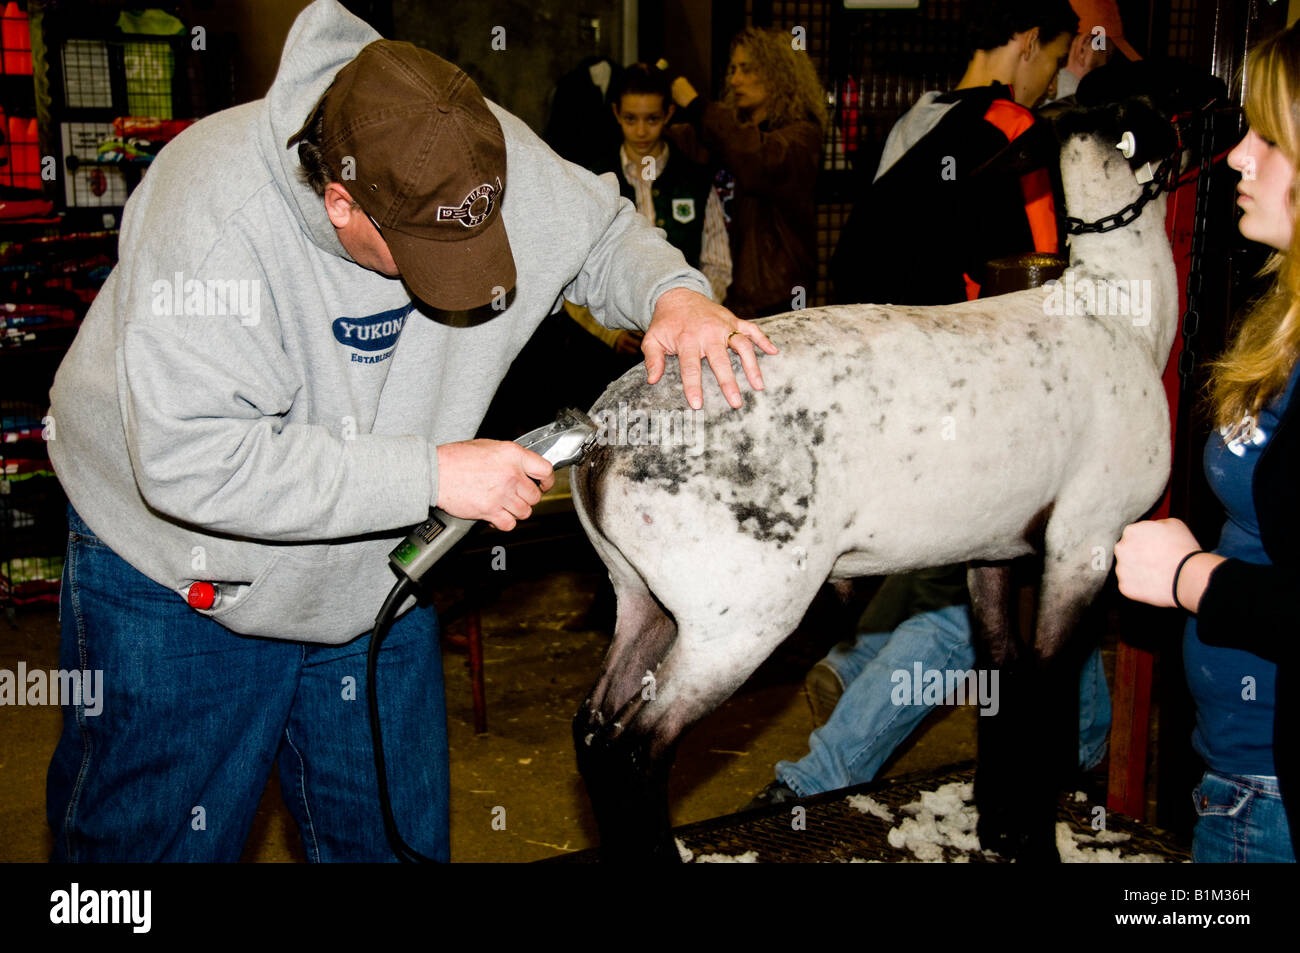 A man shears a sheep to ready it for showing in a 4-H exhibition in Oklahoma City, Oklahoma, while the teenage girl owner looks on. Stock Photo